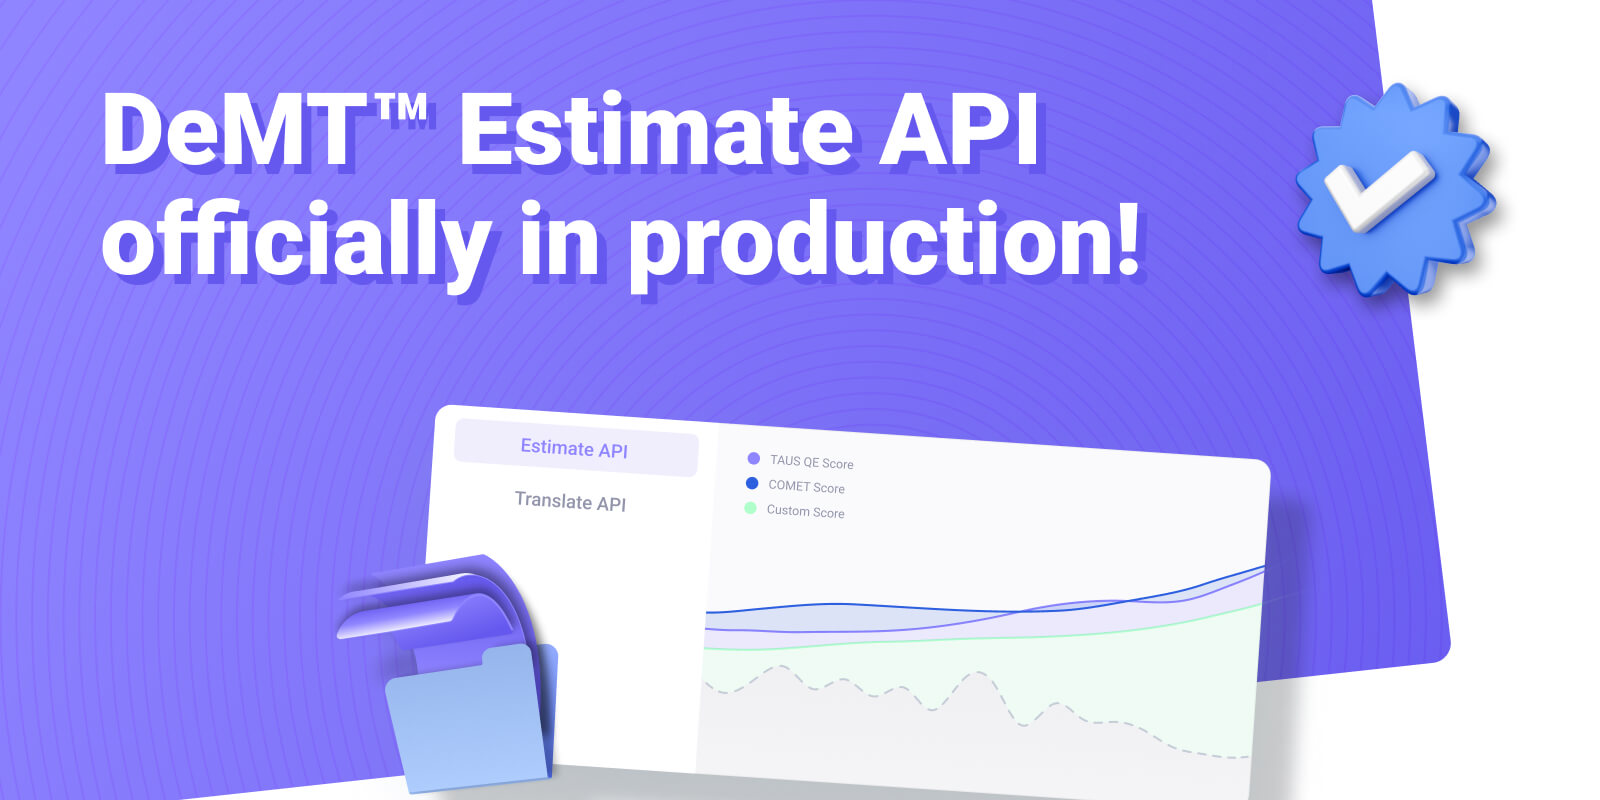 taus-estimate-api-officially-in-production